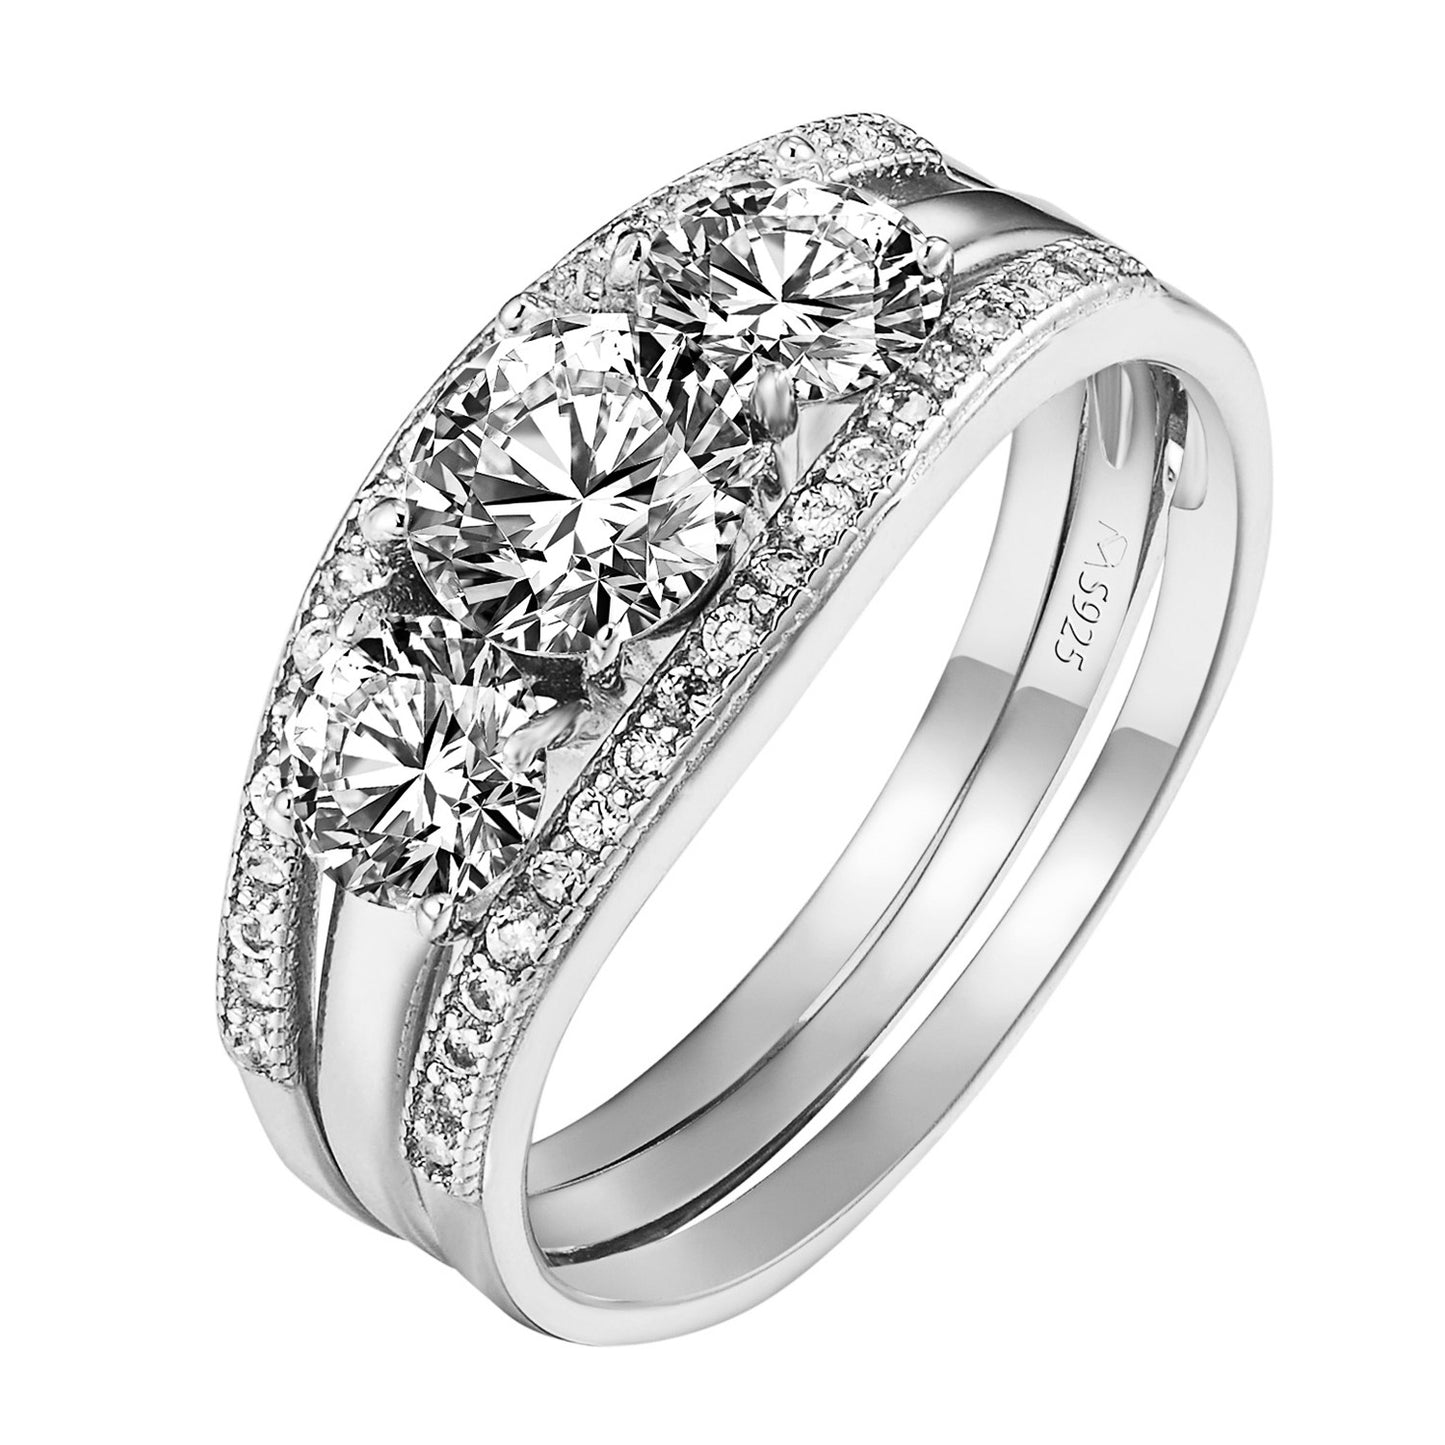 Sterling Silver 3 Solitaire Ring Cubic Zirconia Engagement Wedding Womens Bridal